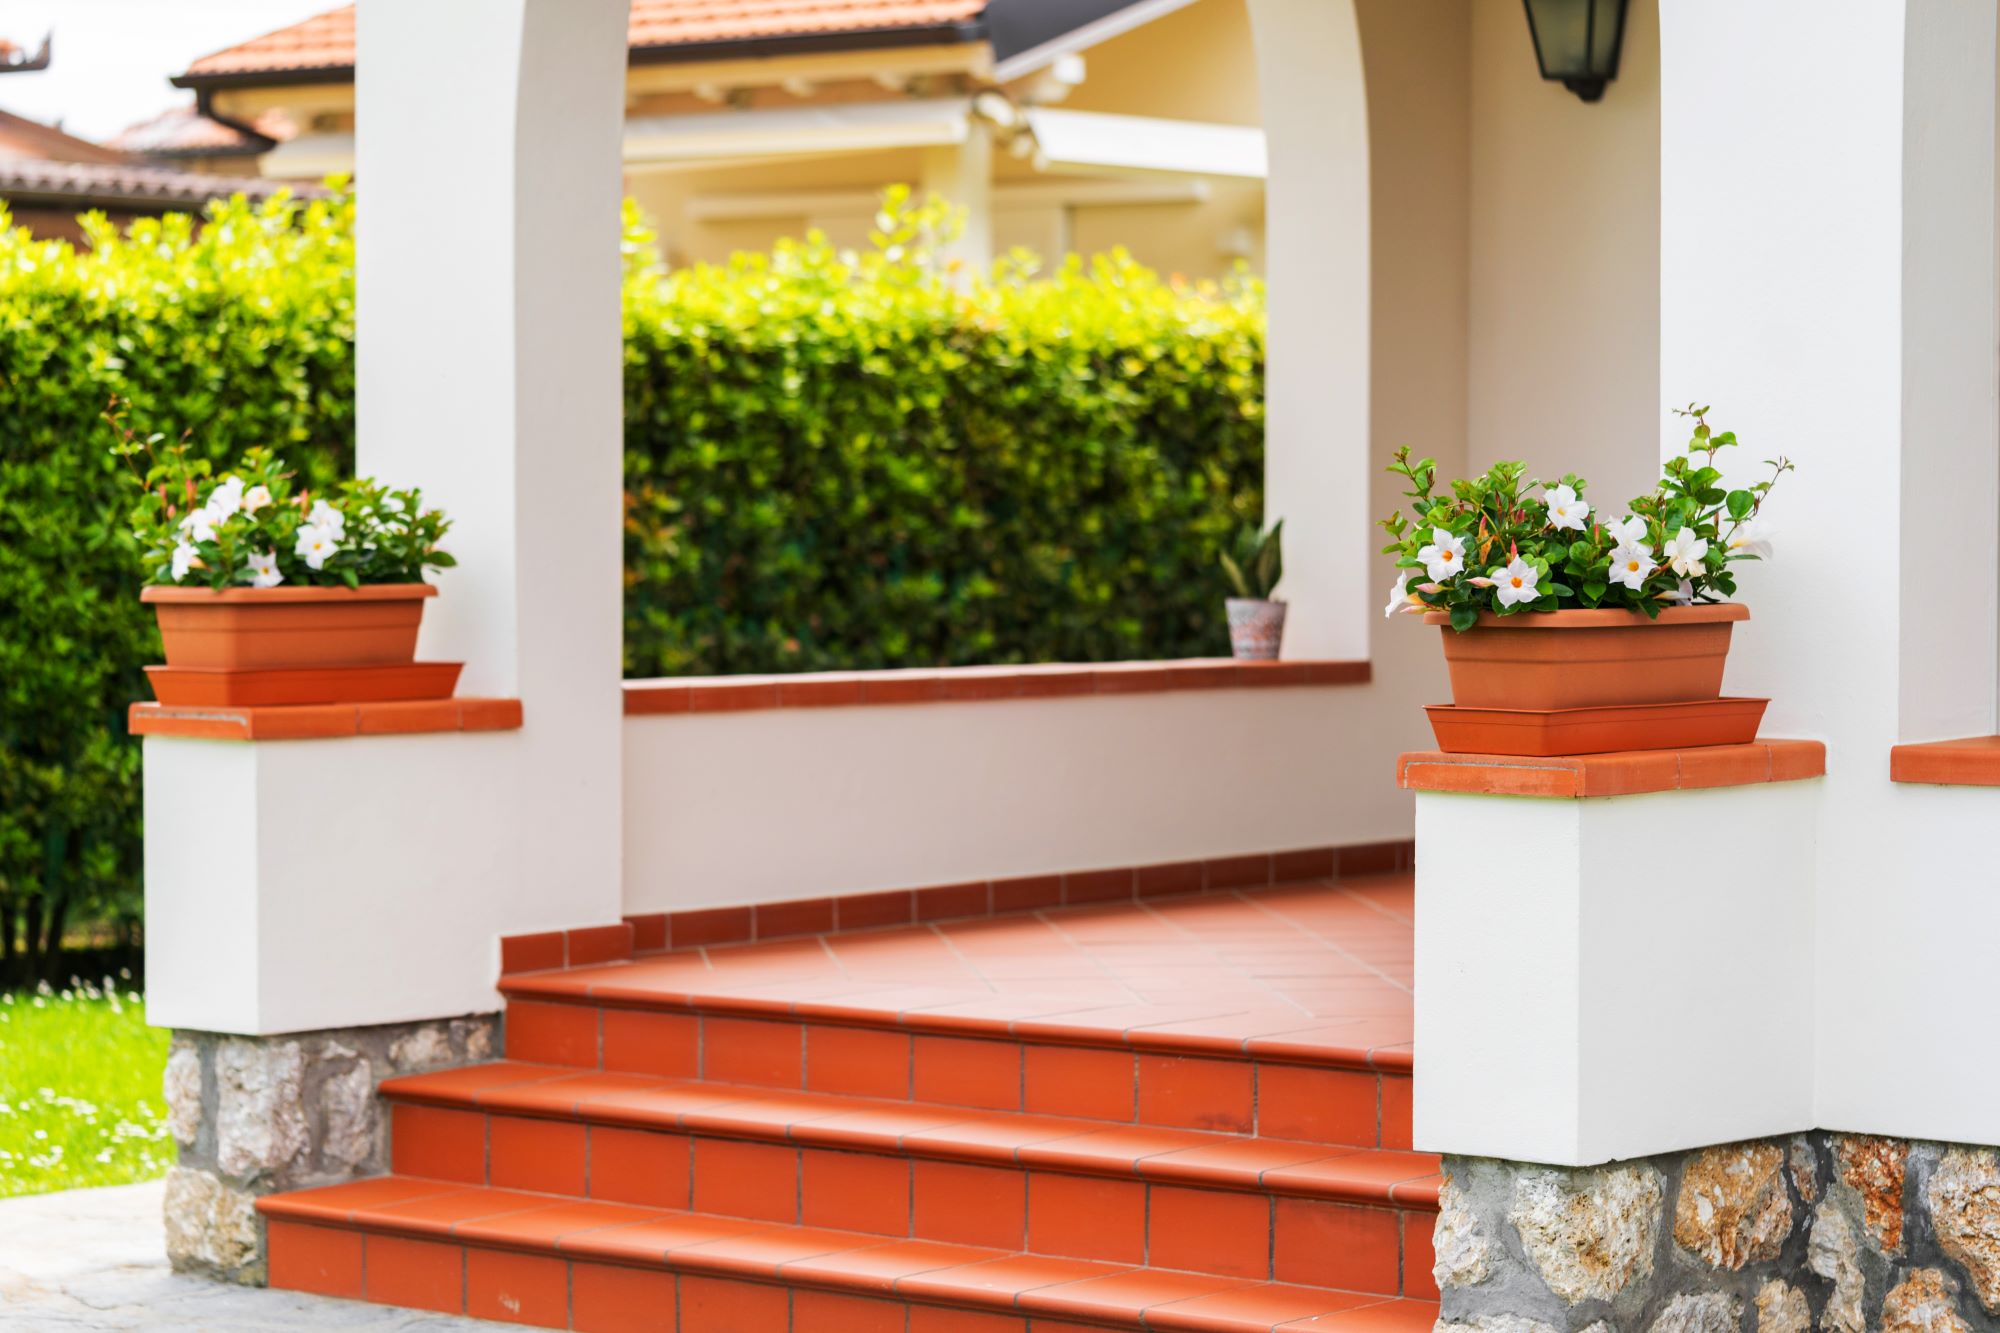 A front porch with red tiled steps, two potted plants on columns, and green shrubbery in the background sets a charming scene reminiscent of an Auto Draft blueprint come to life.